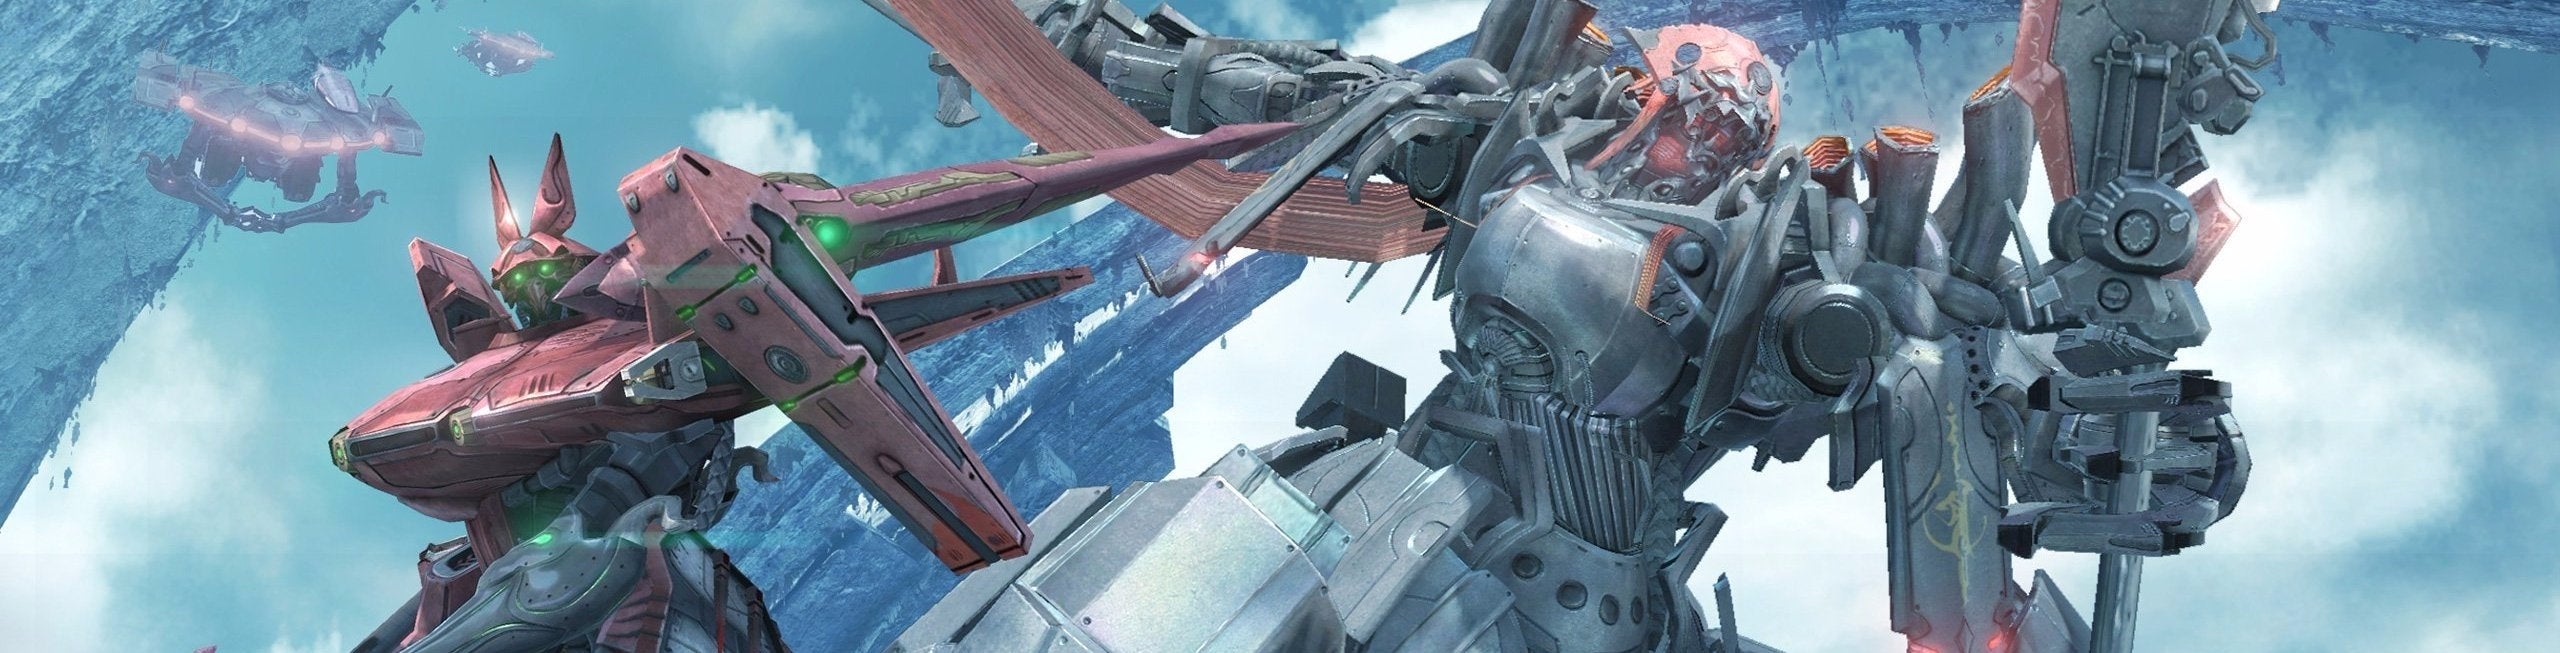 Image for Xenoblade Chronicles X review